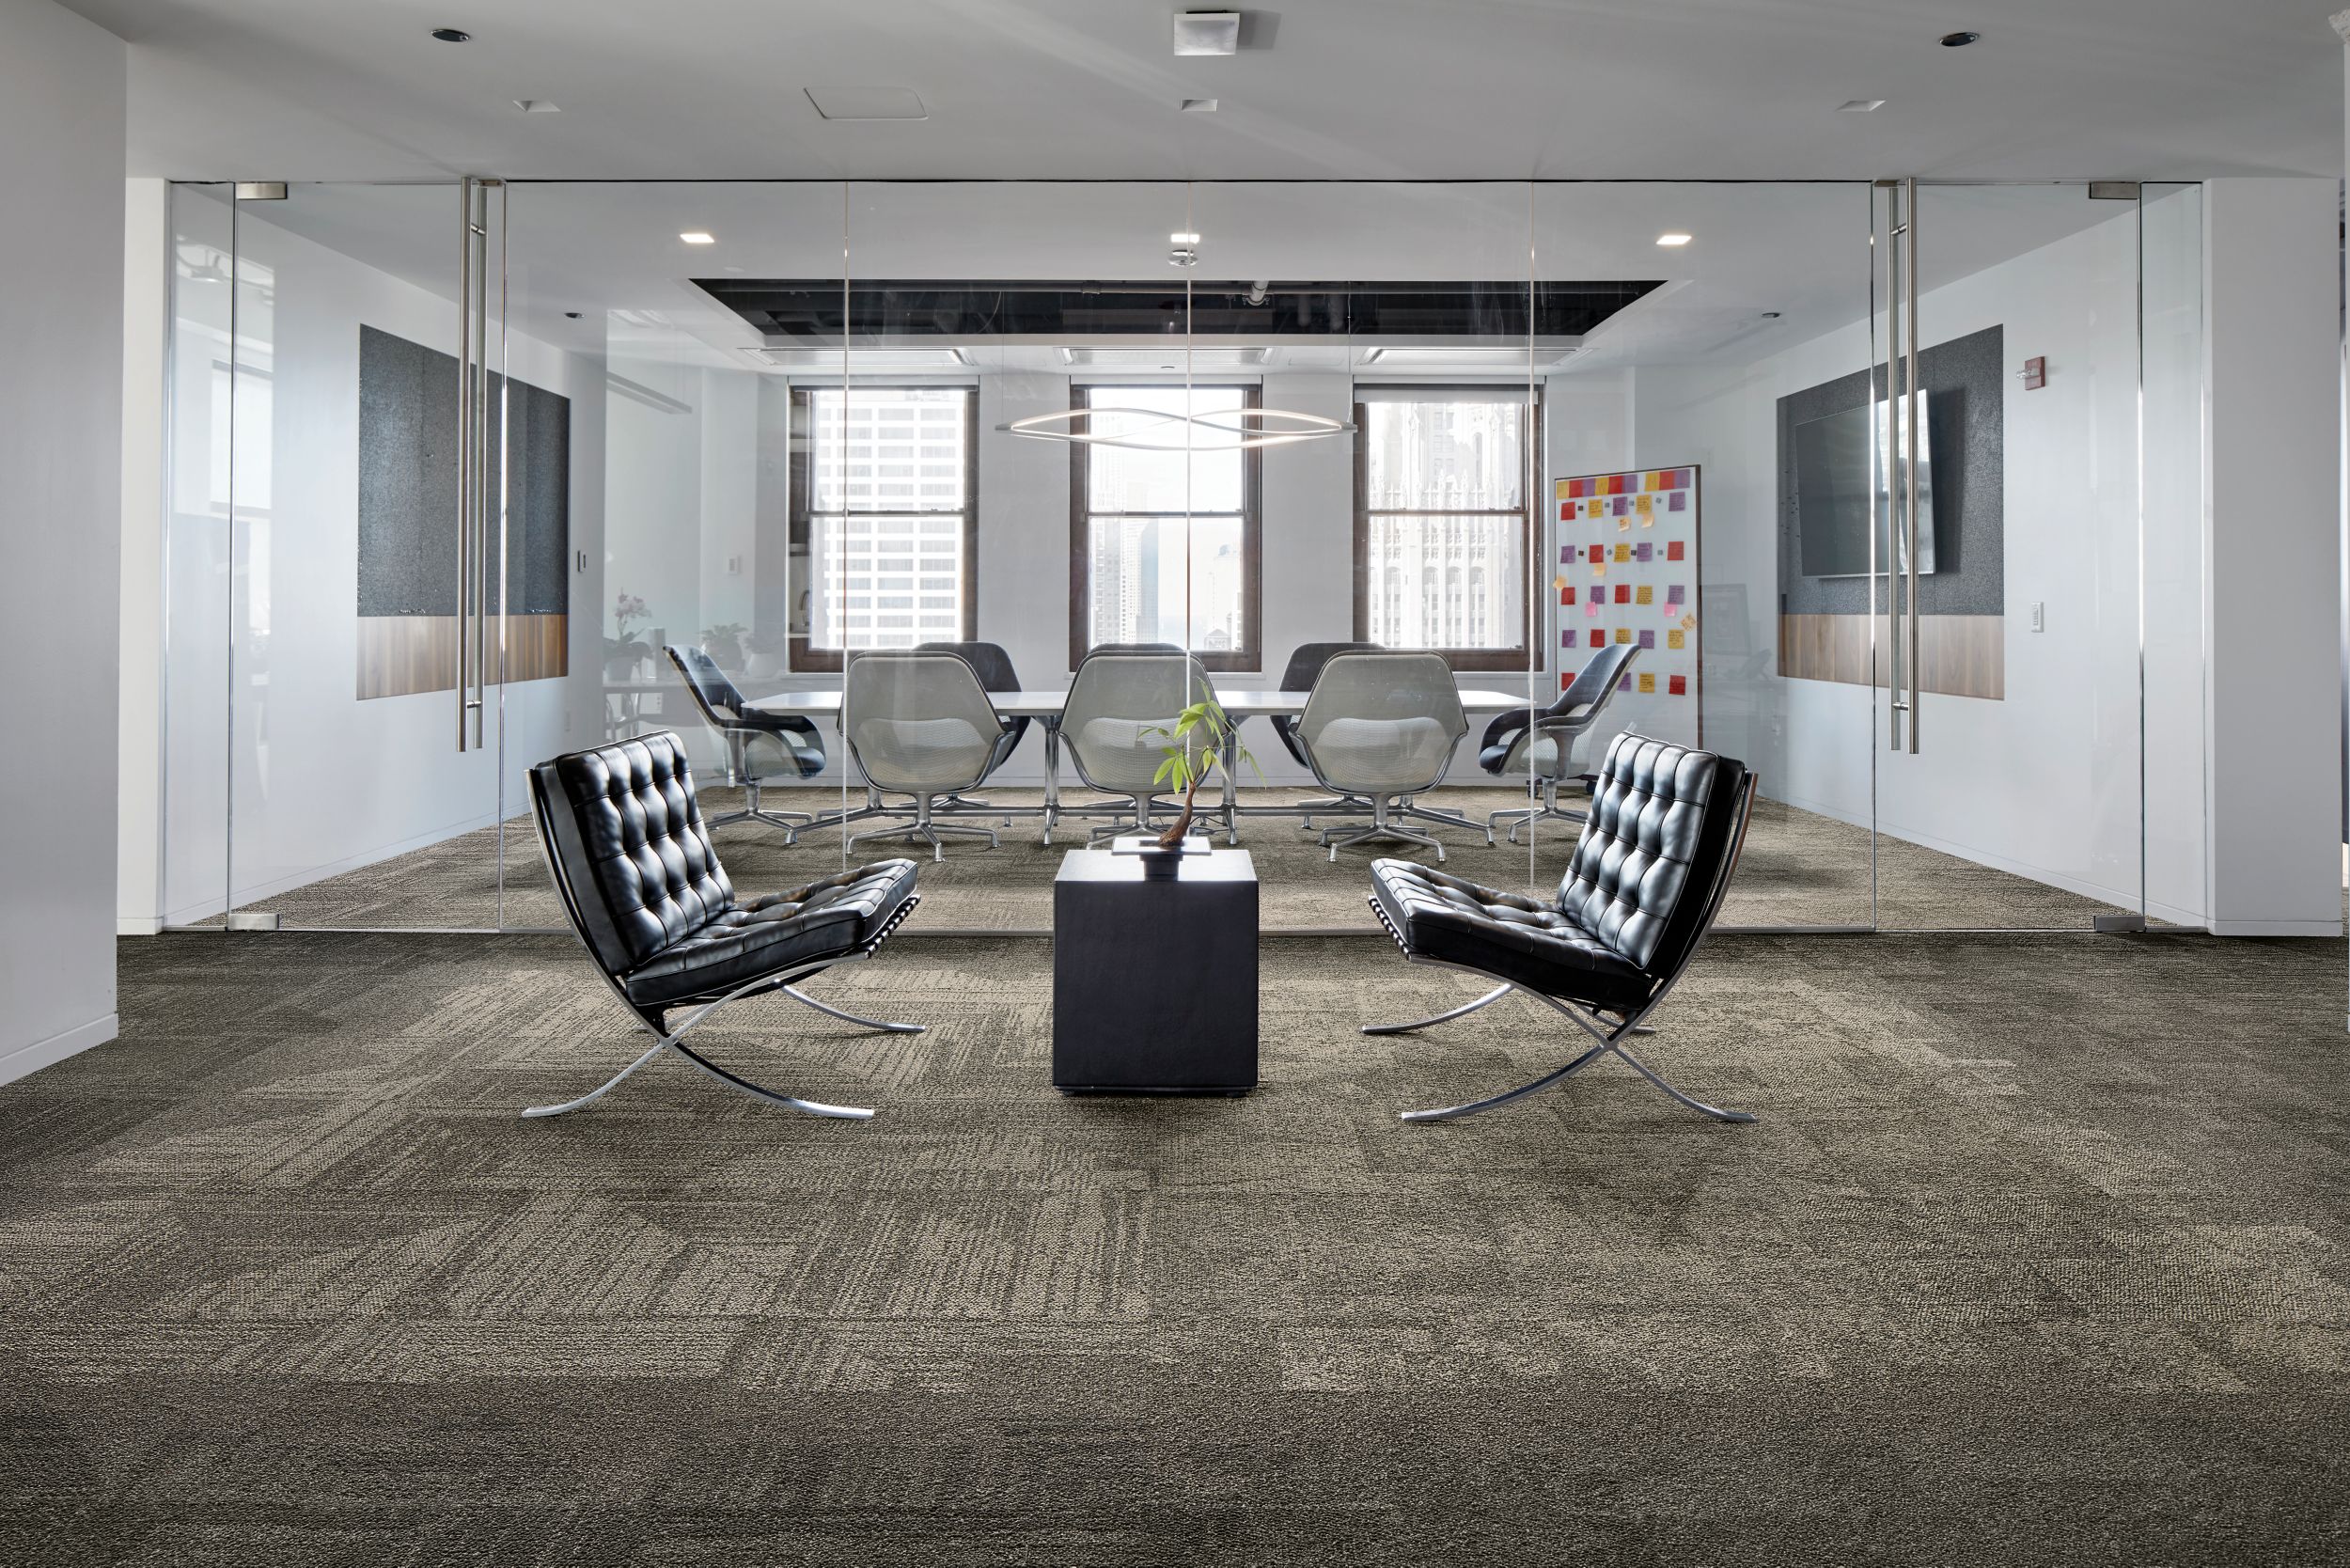 Interface Open Air 403 carpet tile in waiting area with meeting room in background número de imagen 2